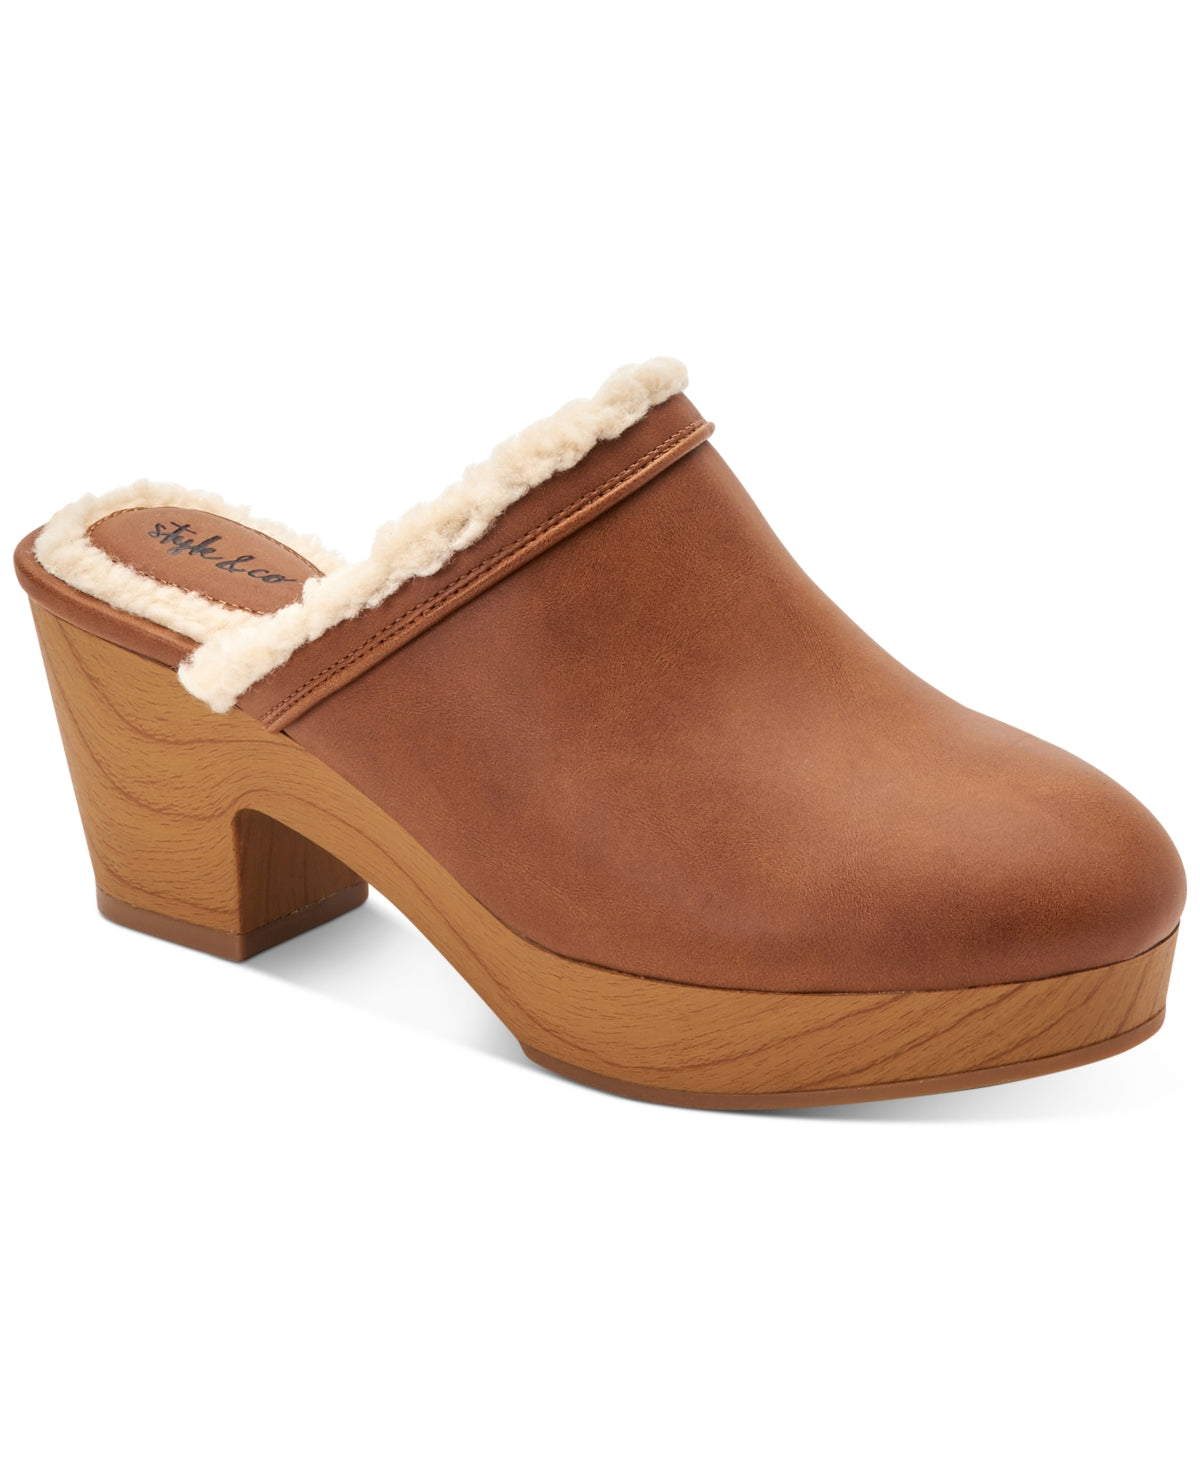 Style Co Tooma Clog Mules - Brown Smooth - 10M